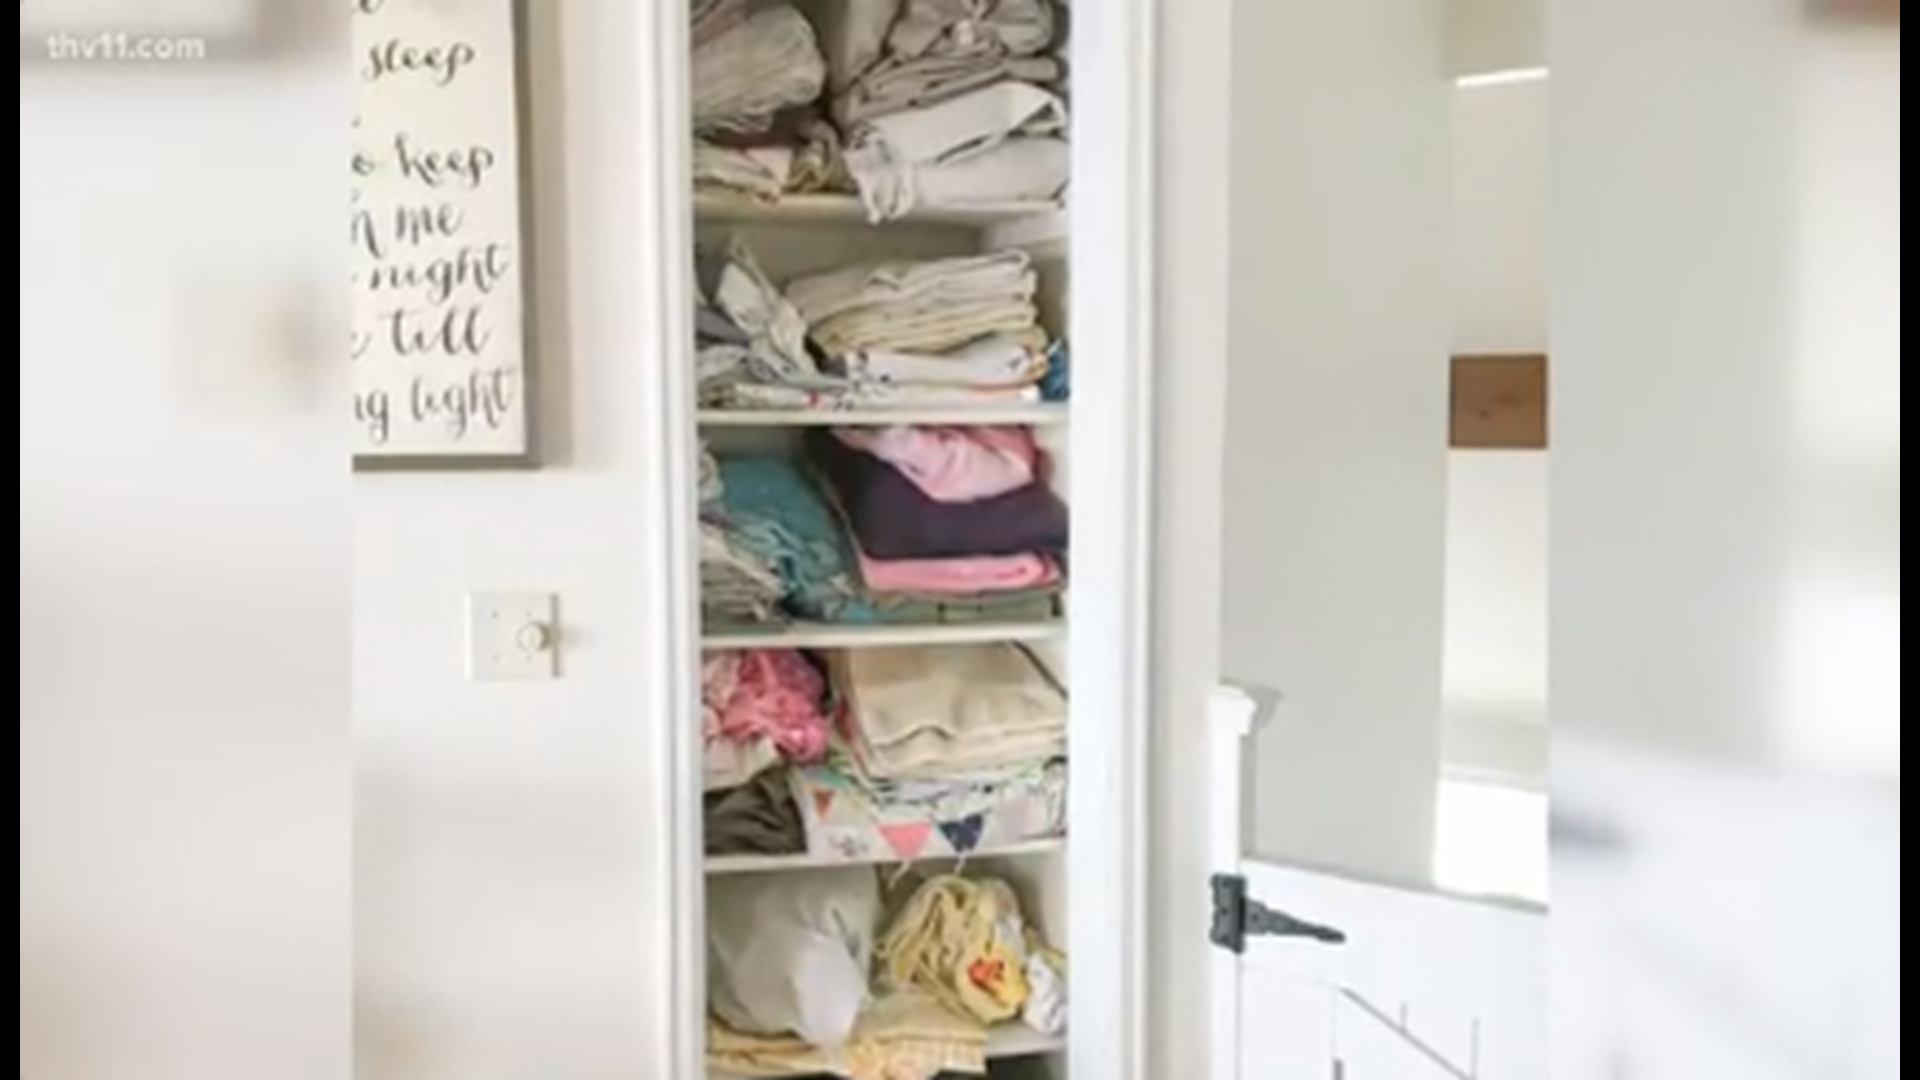 How To Organize Your Closet In 3 Easy Steps